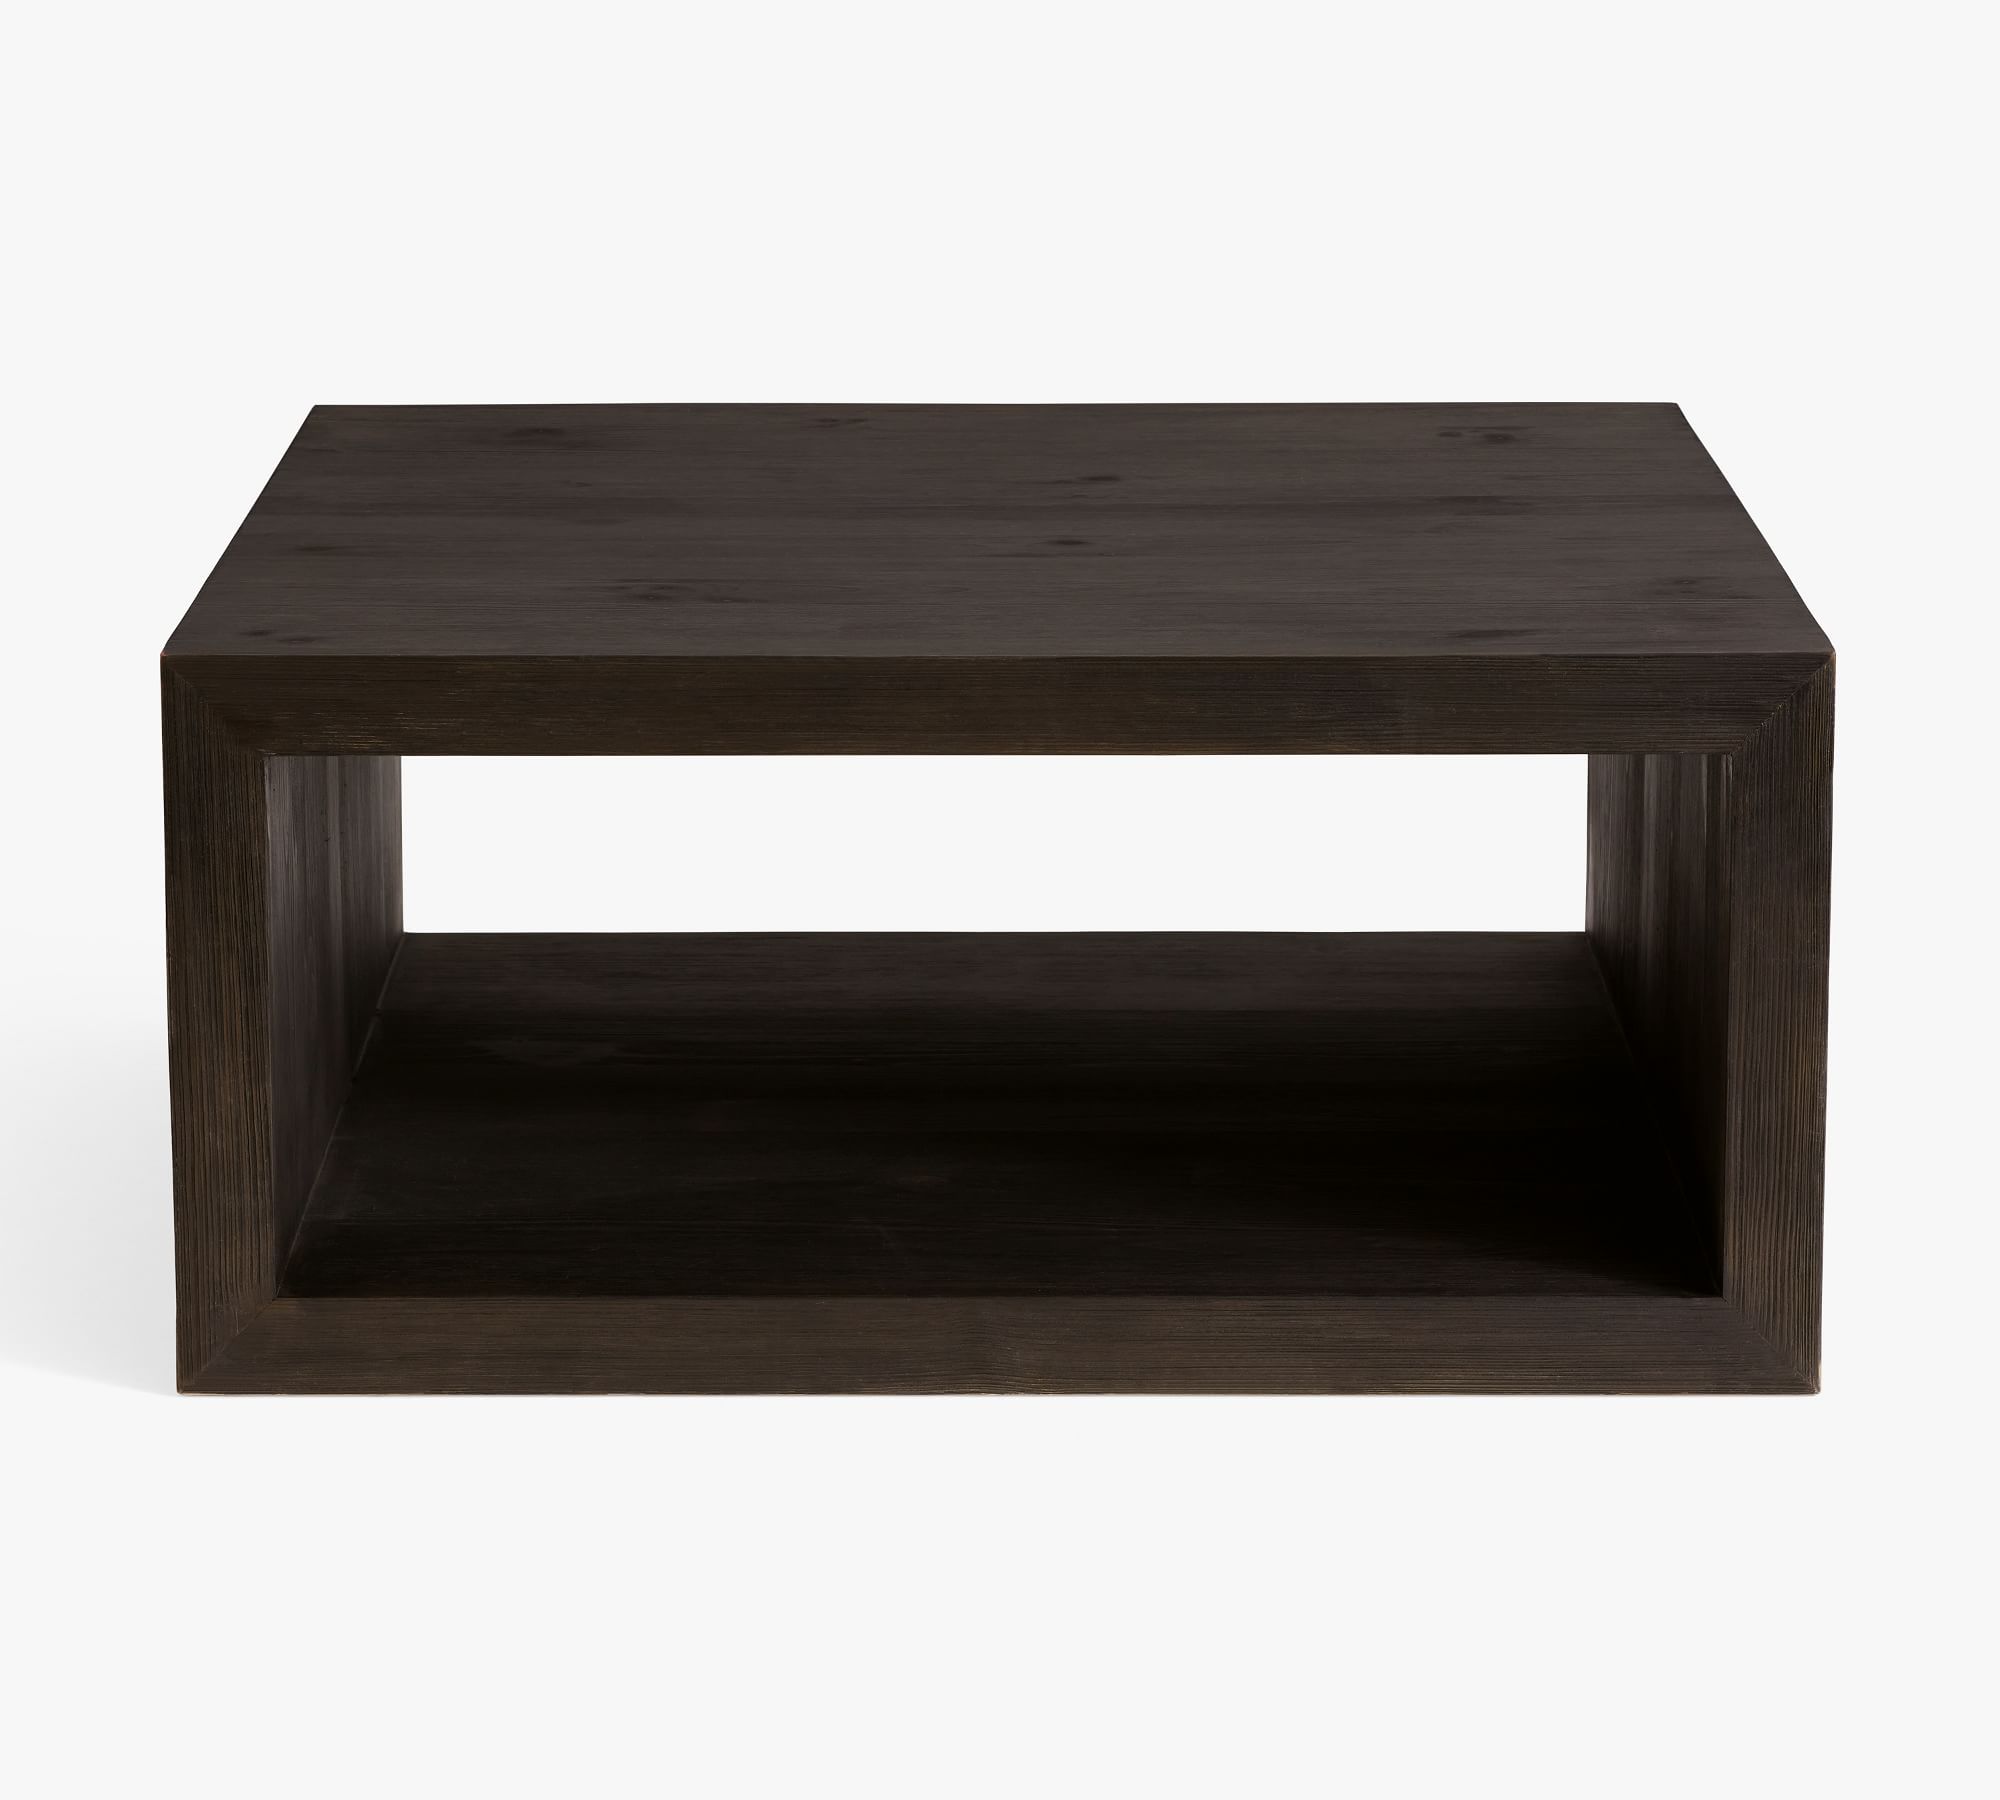 Folsom Large Square Coffee Table (40")